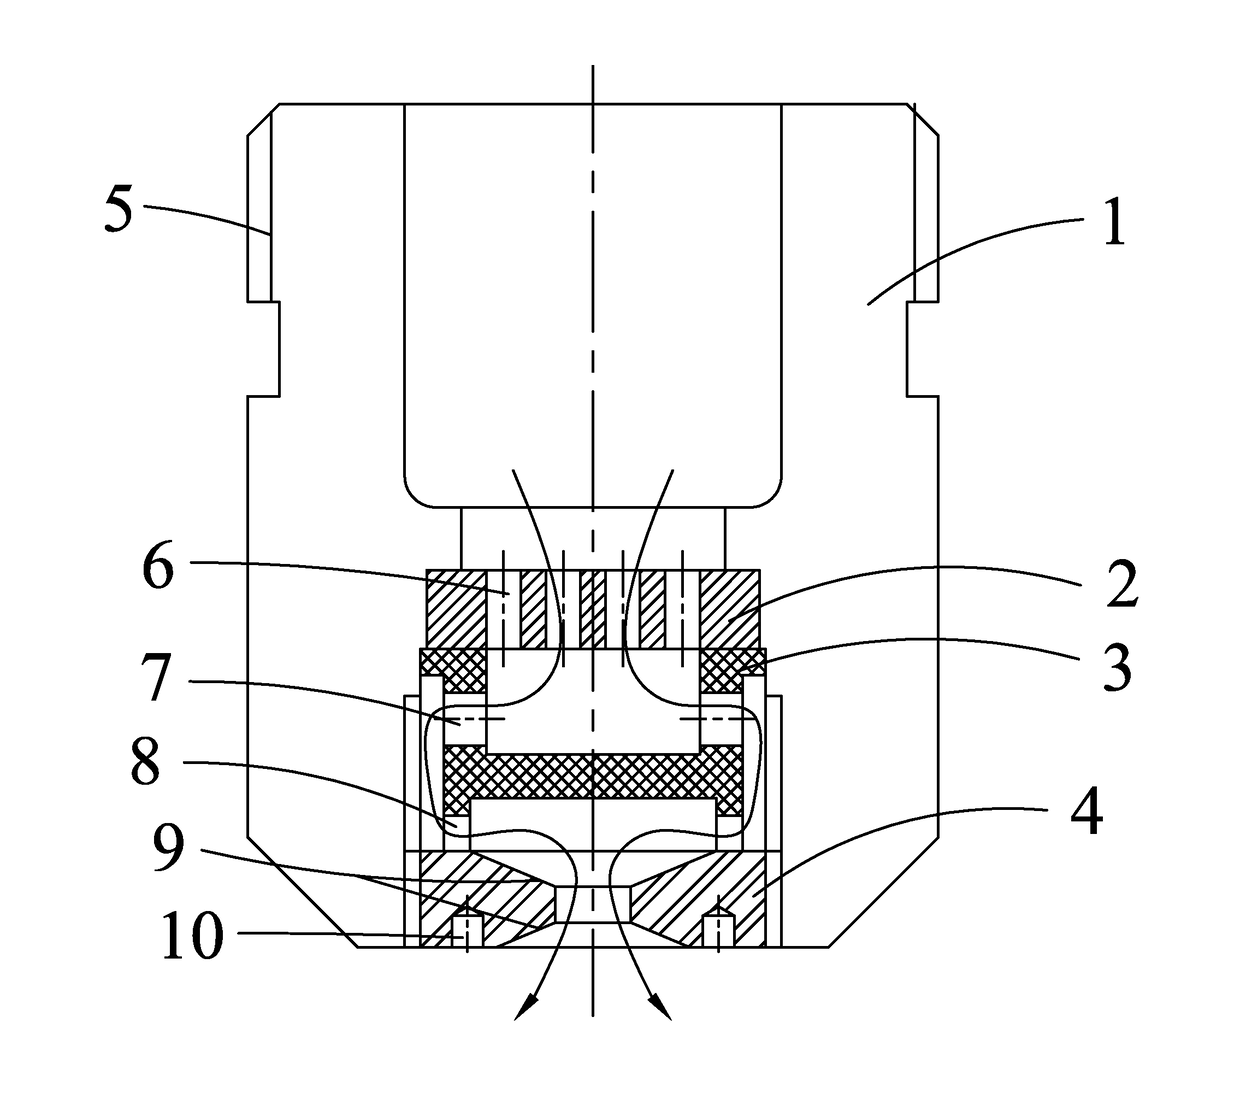 Multistage decompression and micro flow atomizing nozzle